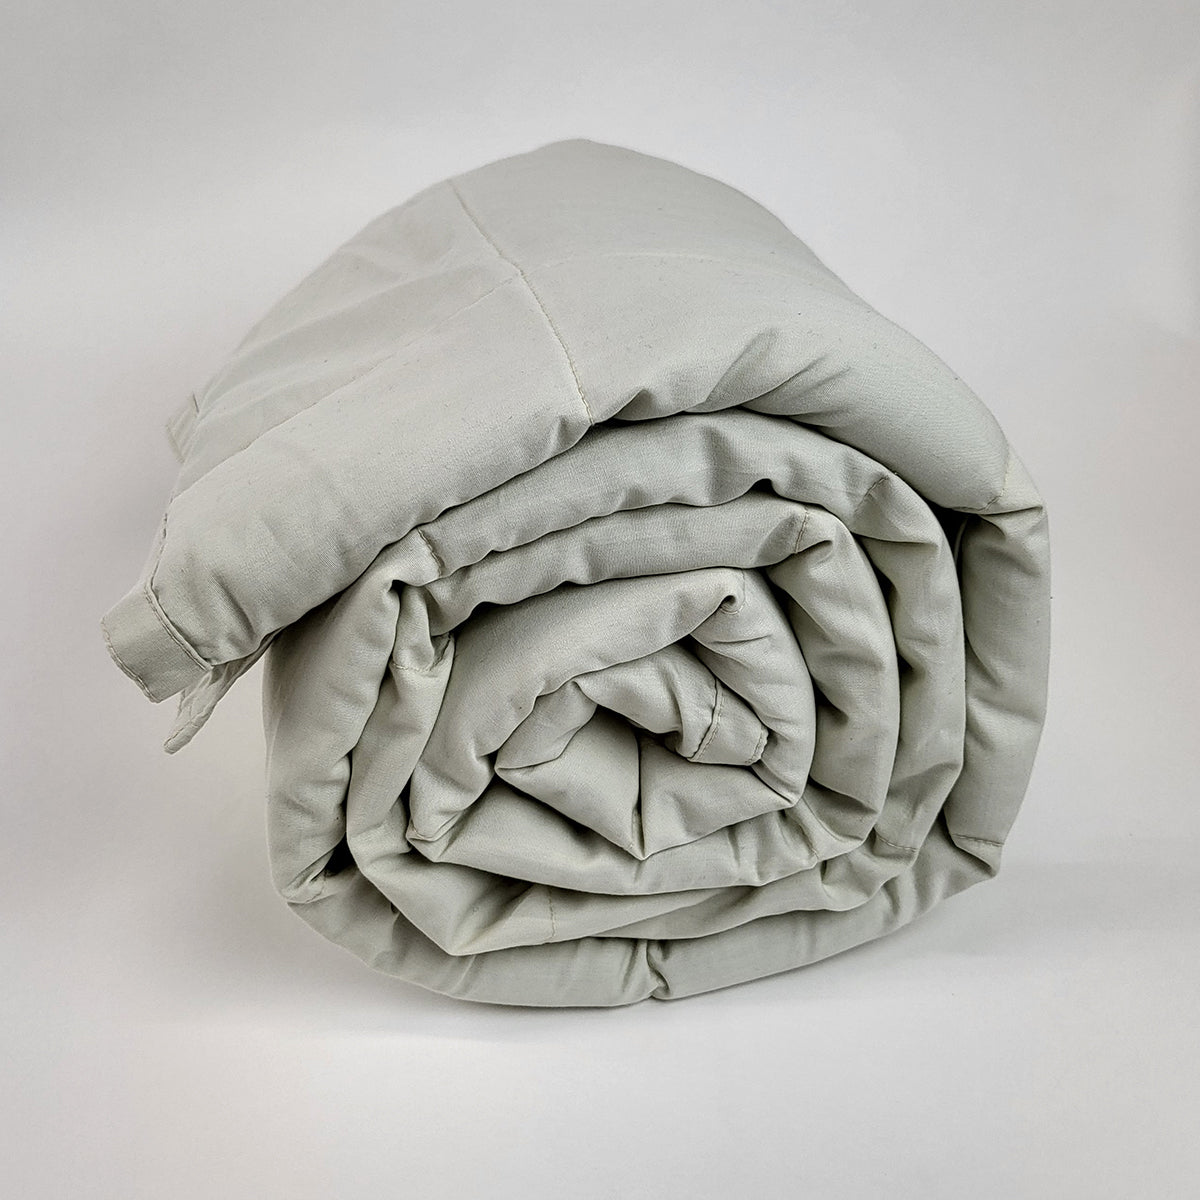 Clearance Weighted Blanket - Large 20 lb Off White Super Cool (170lb + user)